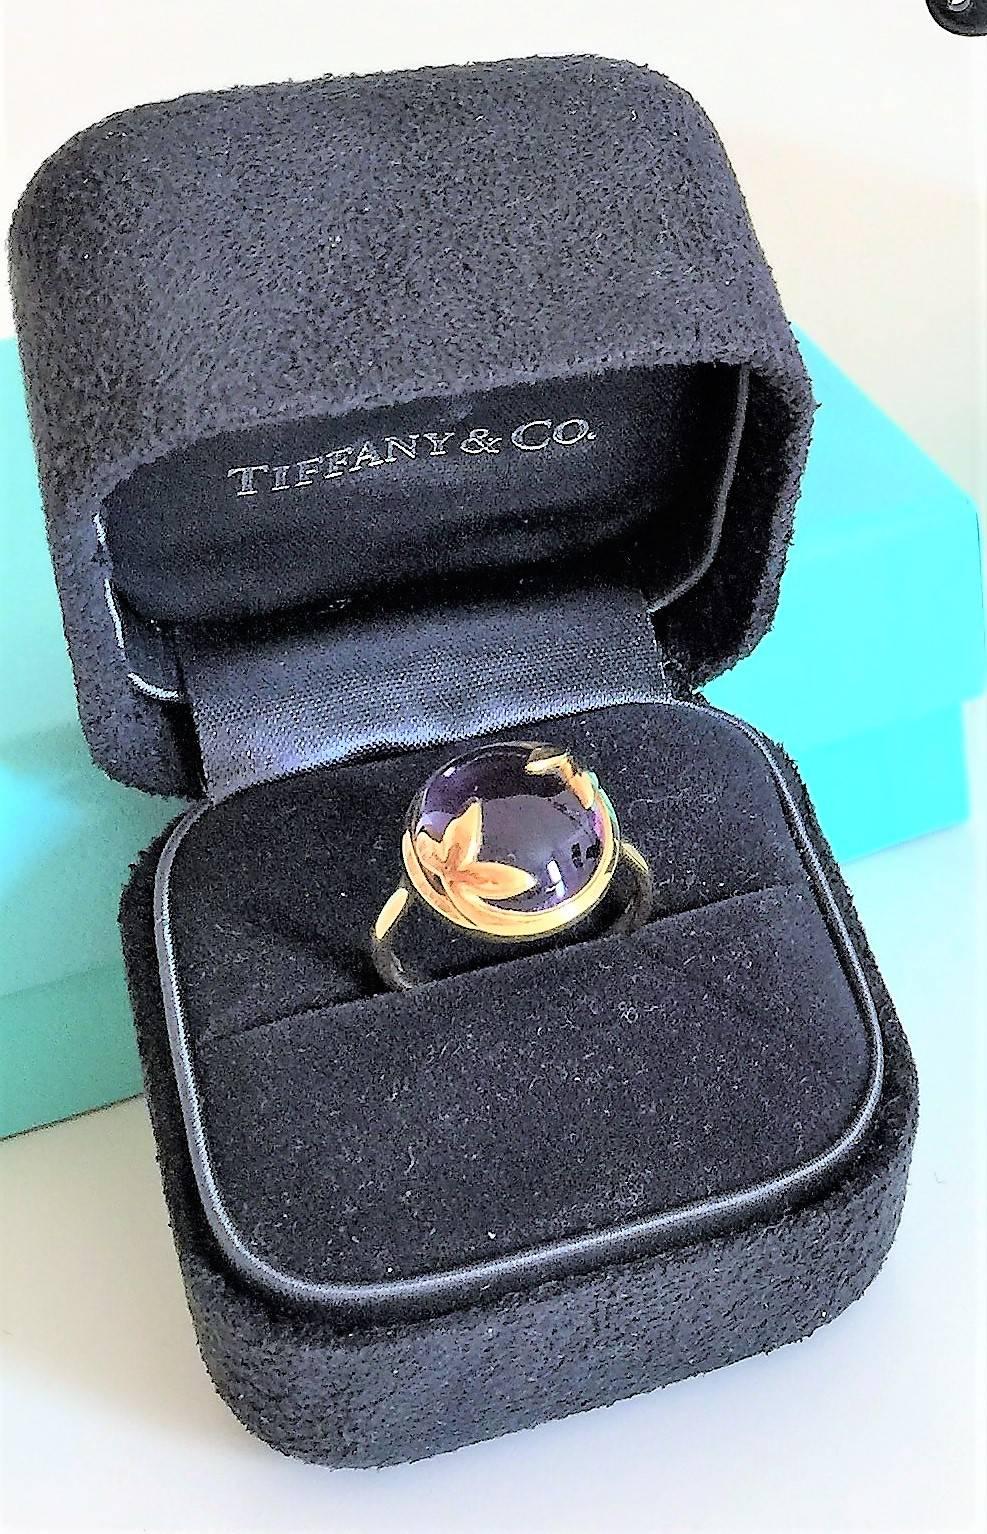 Designed by Paloma Picasso, this beautiful gold ring crafted by Tiffany has sculpted olive leaves in 18k gold as symbol of peace and abundance. Ring in 18k gold with an 6 Carats amethyst. Retail Price $1100
Dim.: 0.75